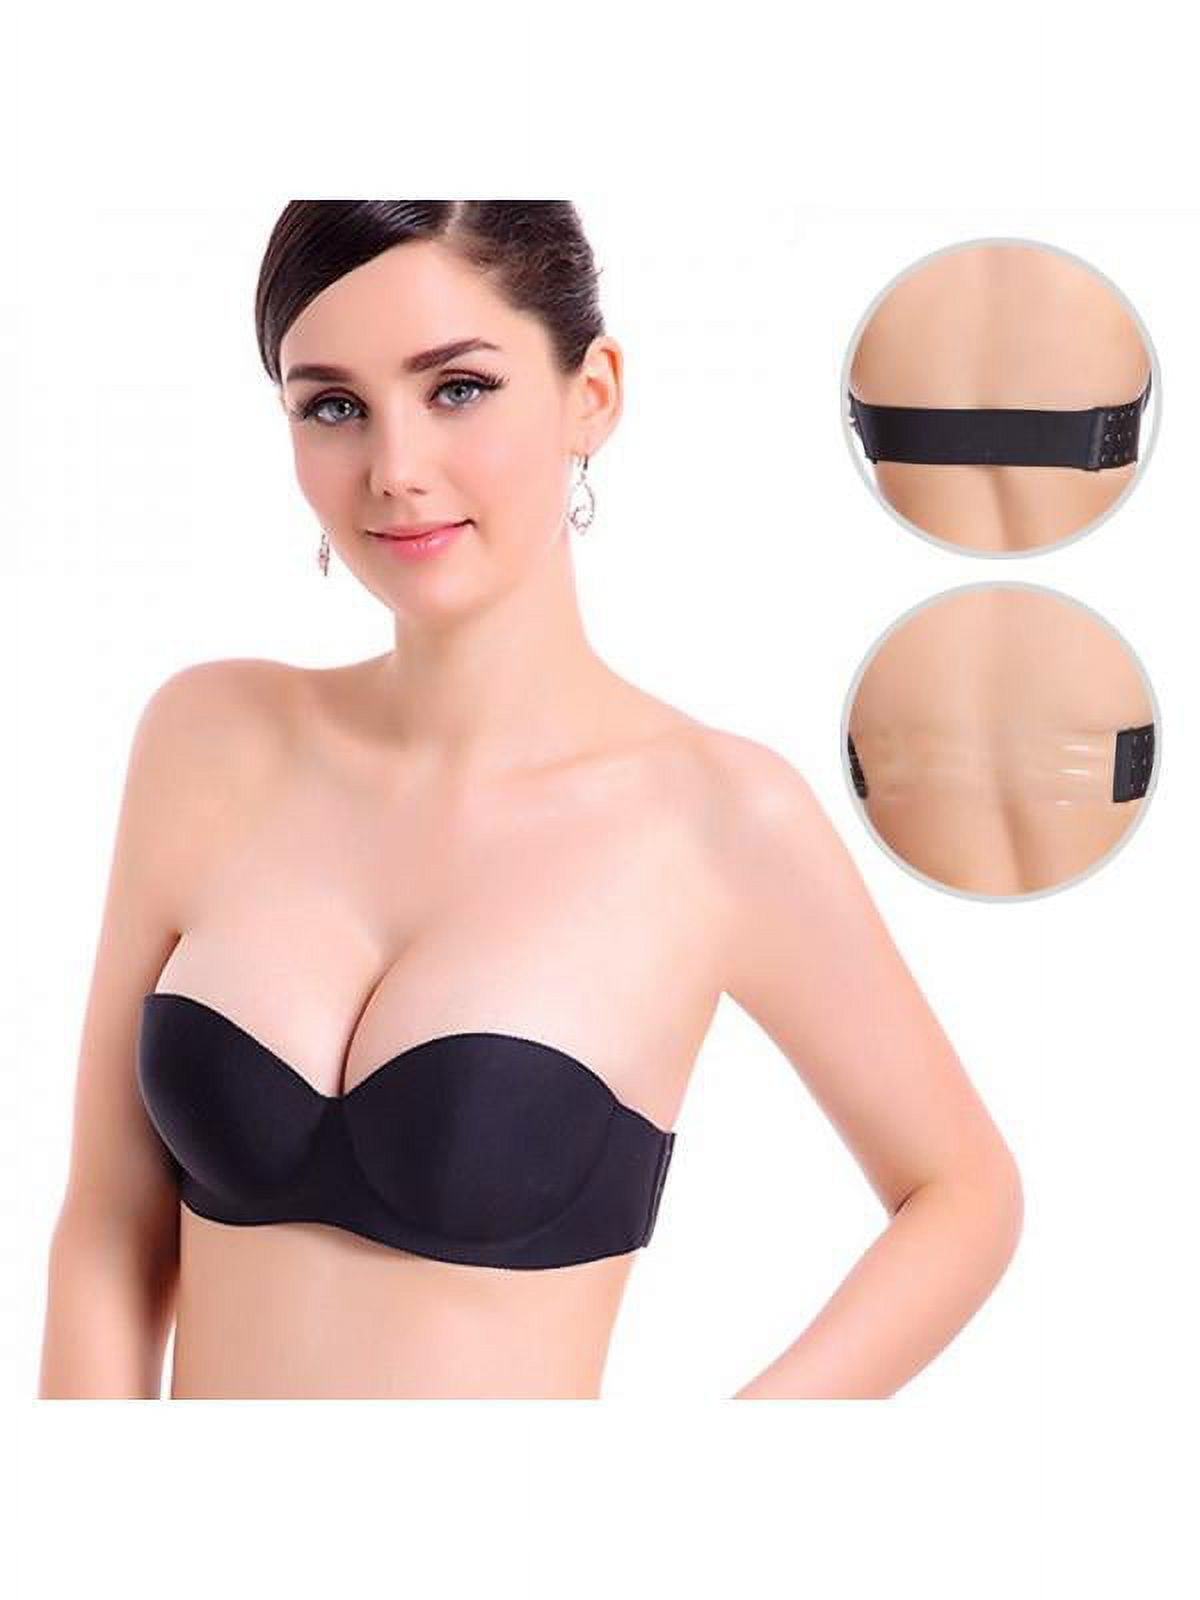 New Push Up Ladies Padded Bra Women Strapless Adjusted Straps Backless  Plunge Size 70 75 80 85 90 A B C D Bh 201202 From Dou01, $9.64